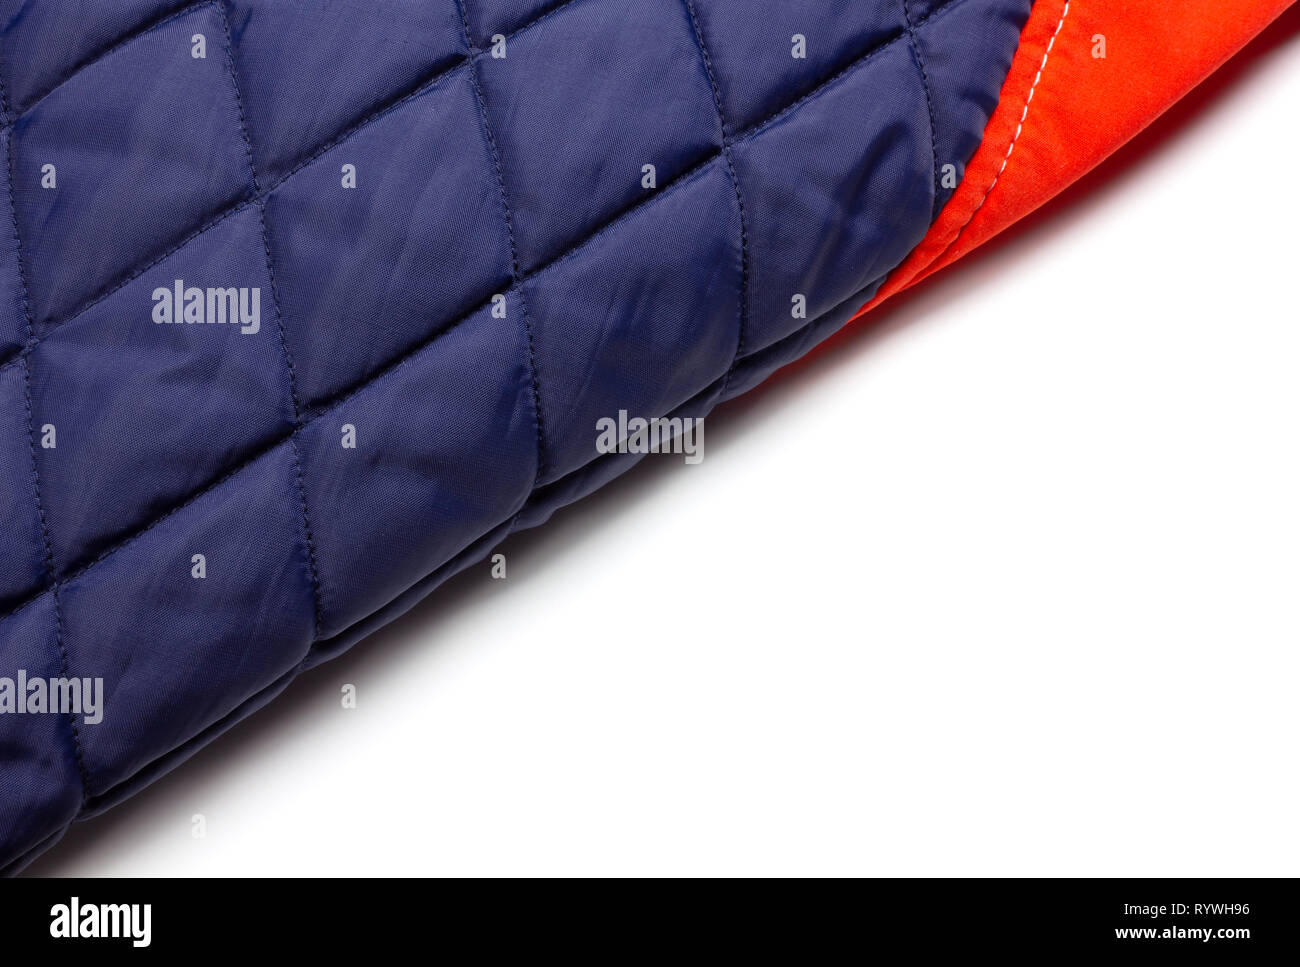 Detail of a portion of the inner side of a red and blue down jacket on a white background, placed so as to divide the composition in two diagonally Stock Photo